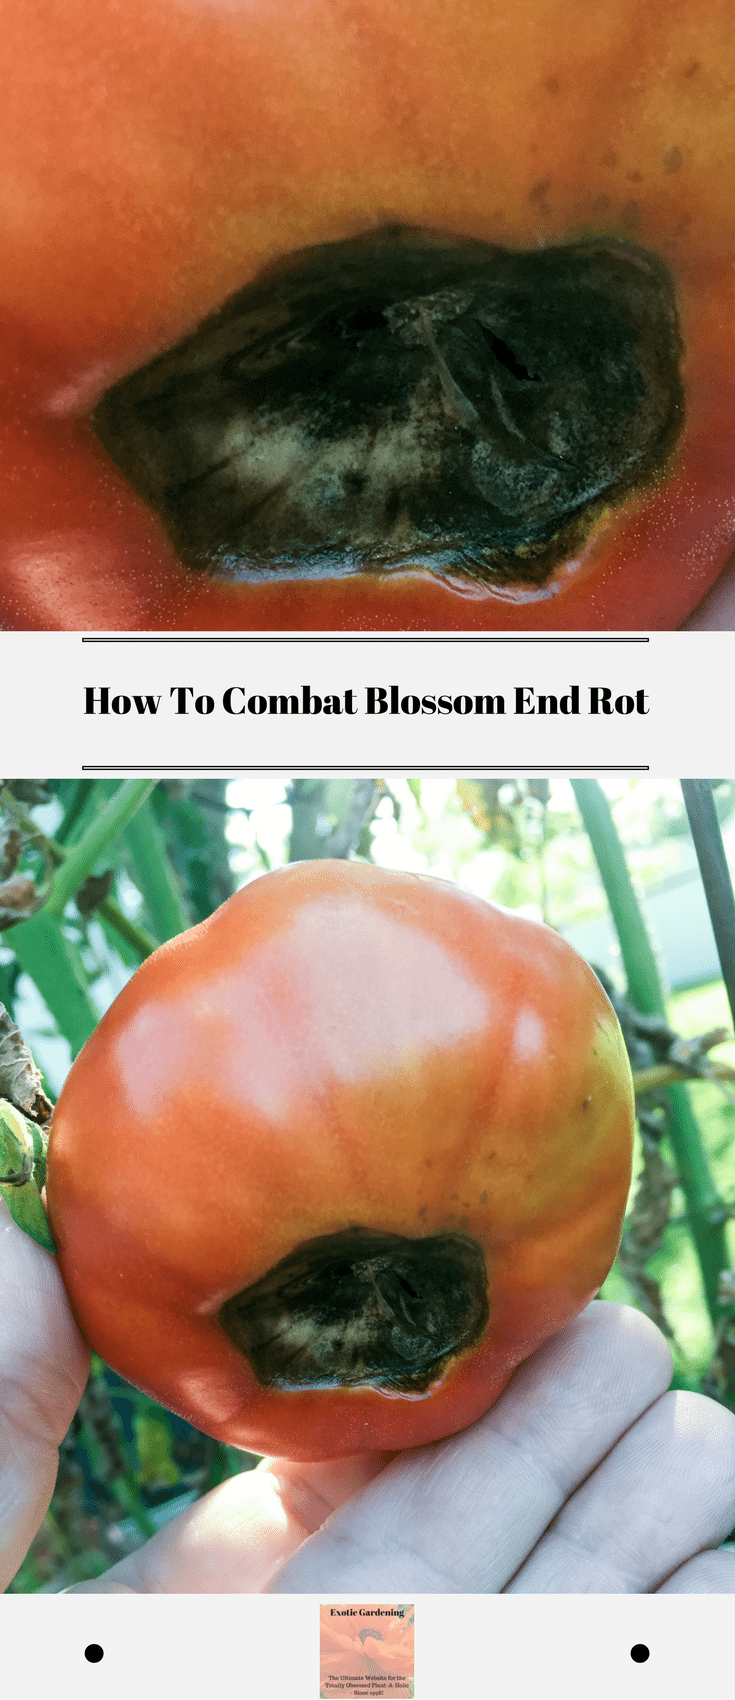 How To Combat Blossom End Rot